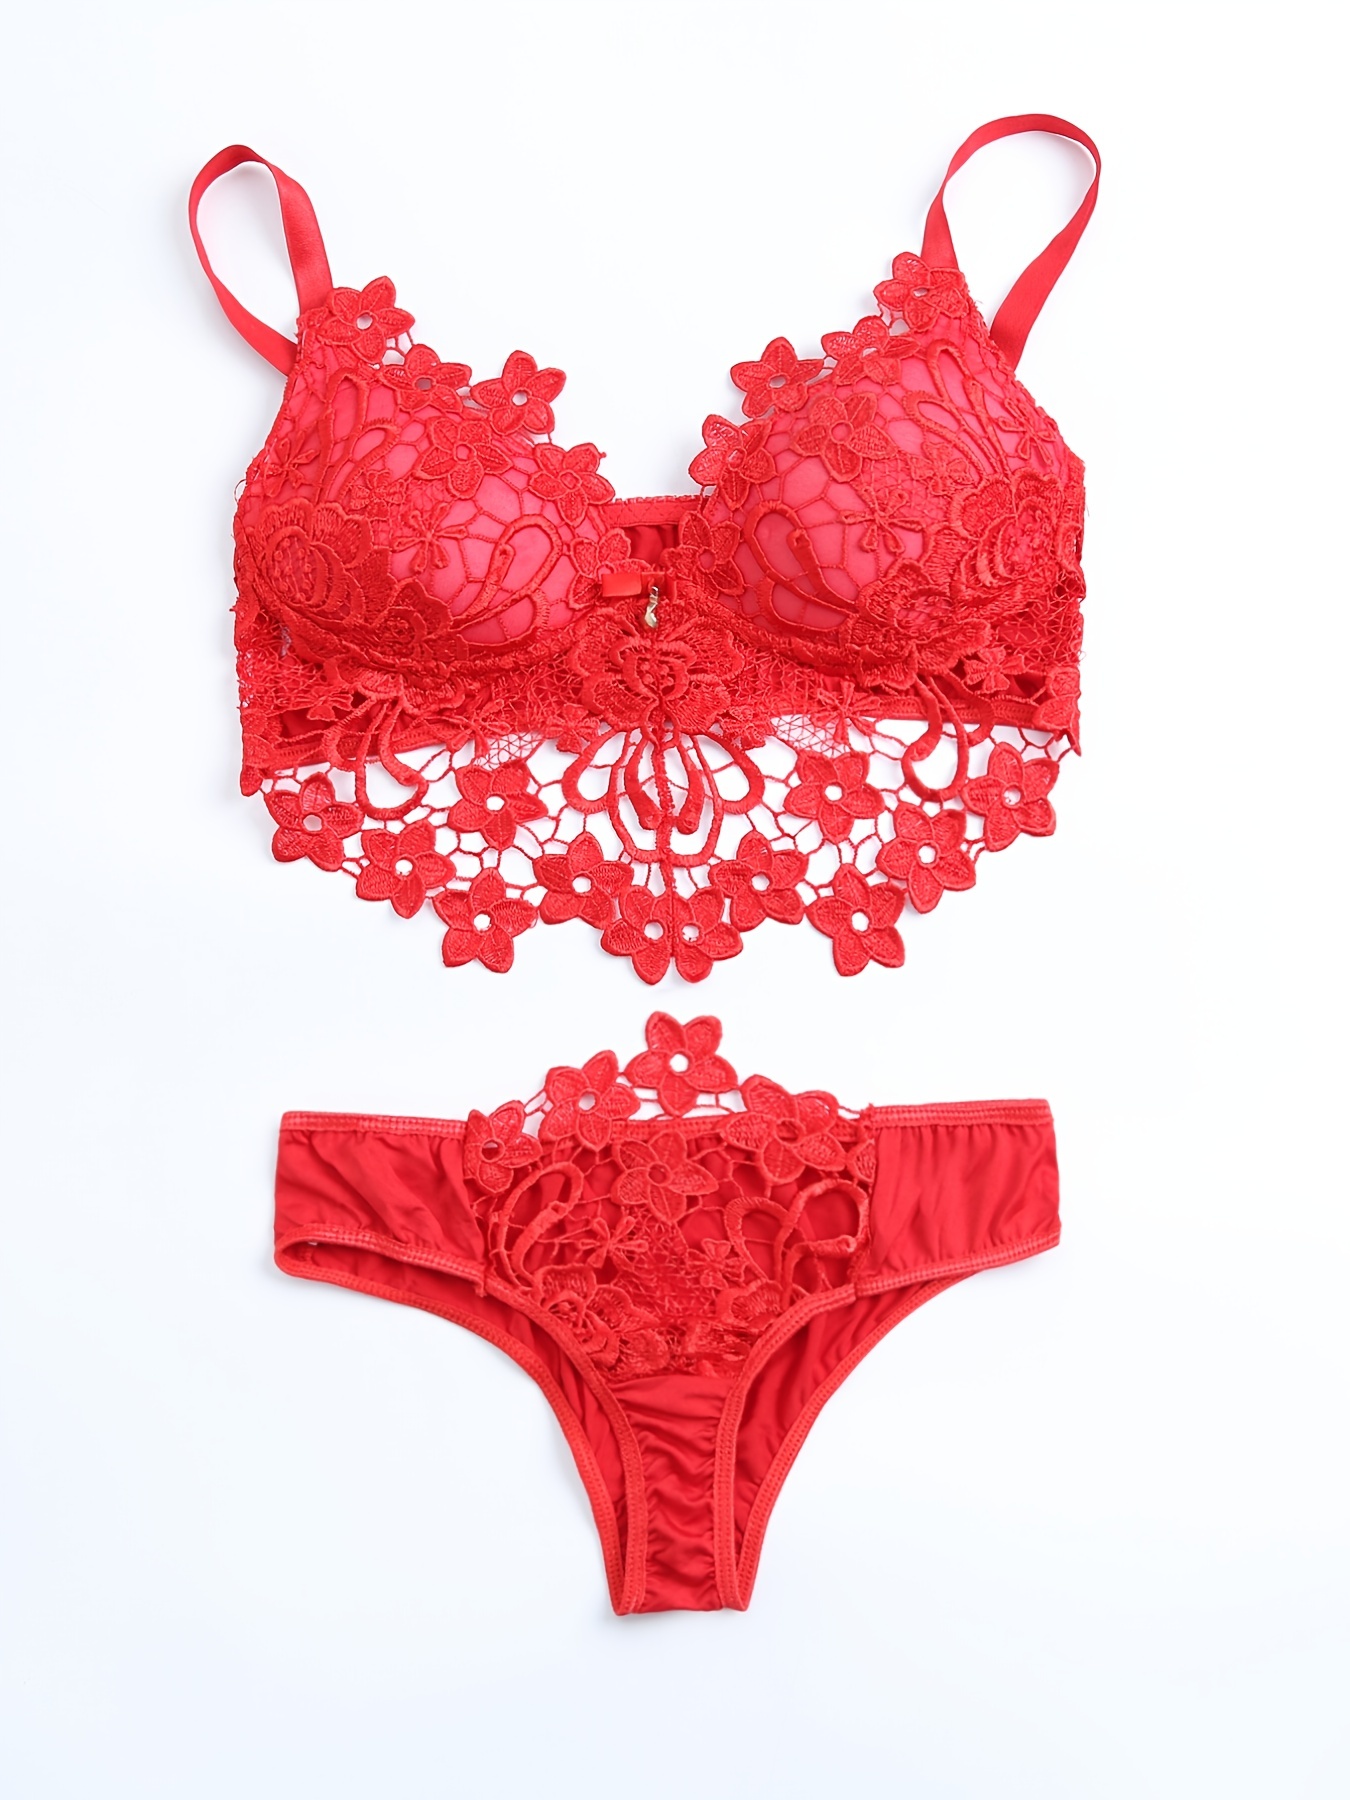 Women Sexy Lace Lingerie Sexy Lingerie Set Two Piece Lace Bra And Panty Set  Bralette Sleepwear red lingerie for women sexy (Red, M)